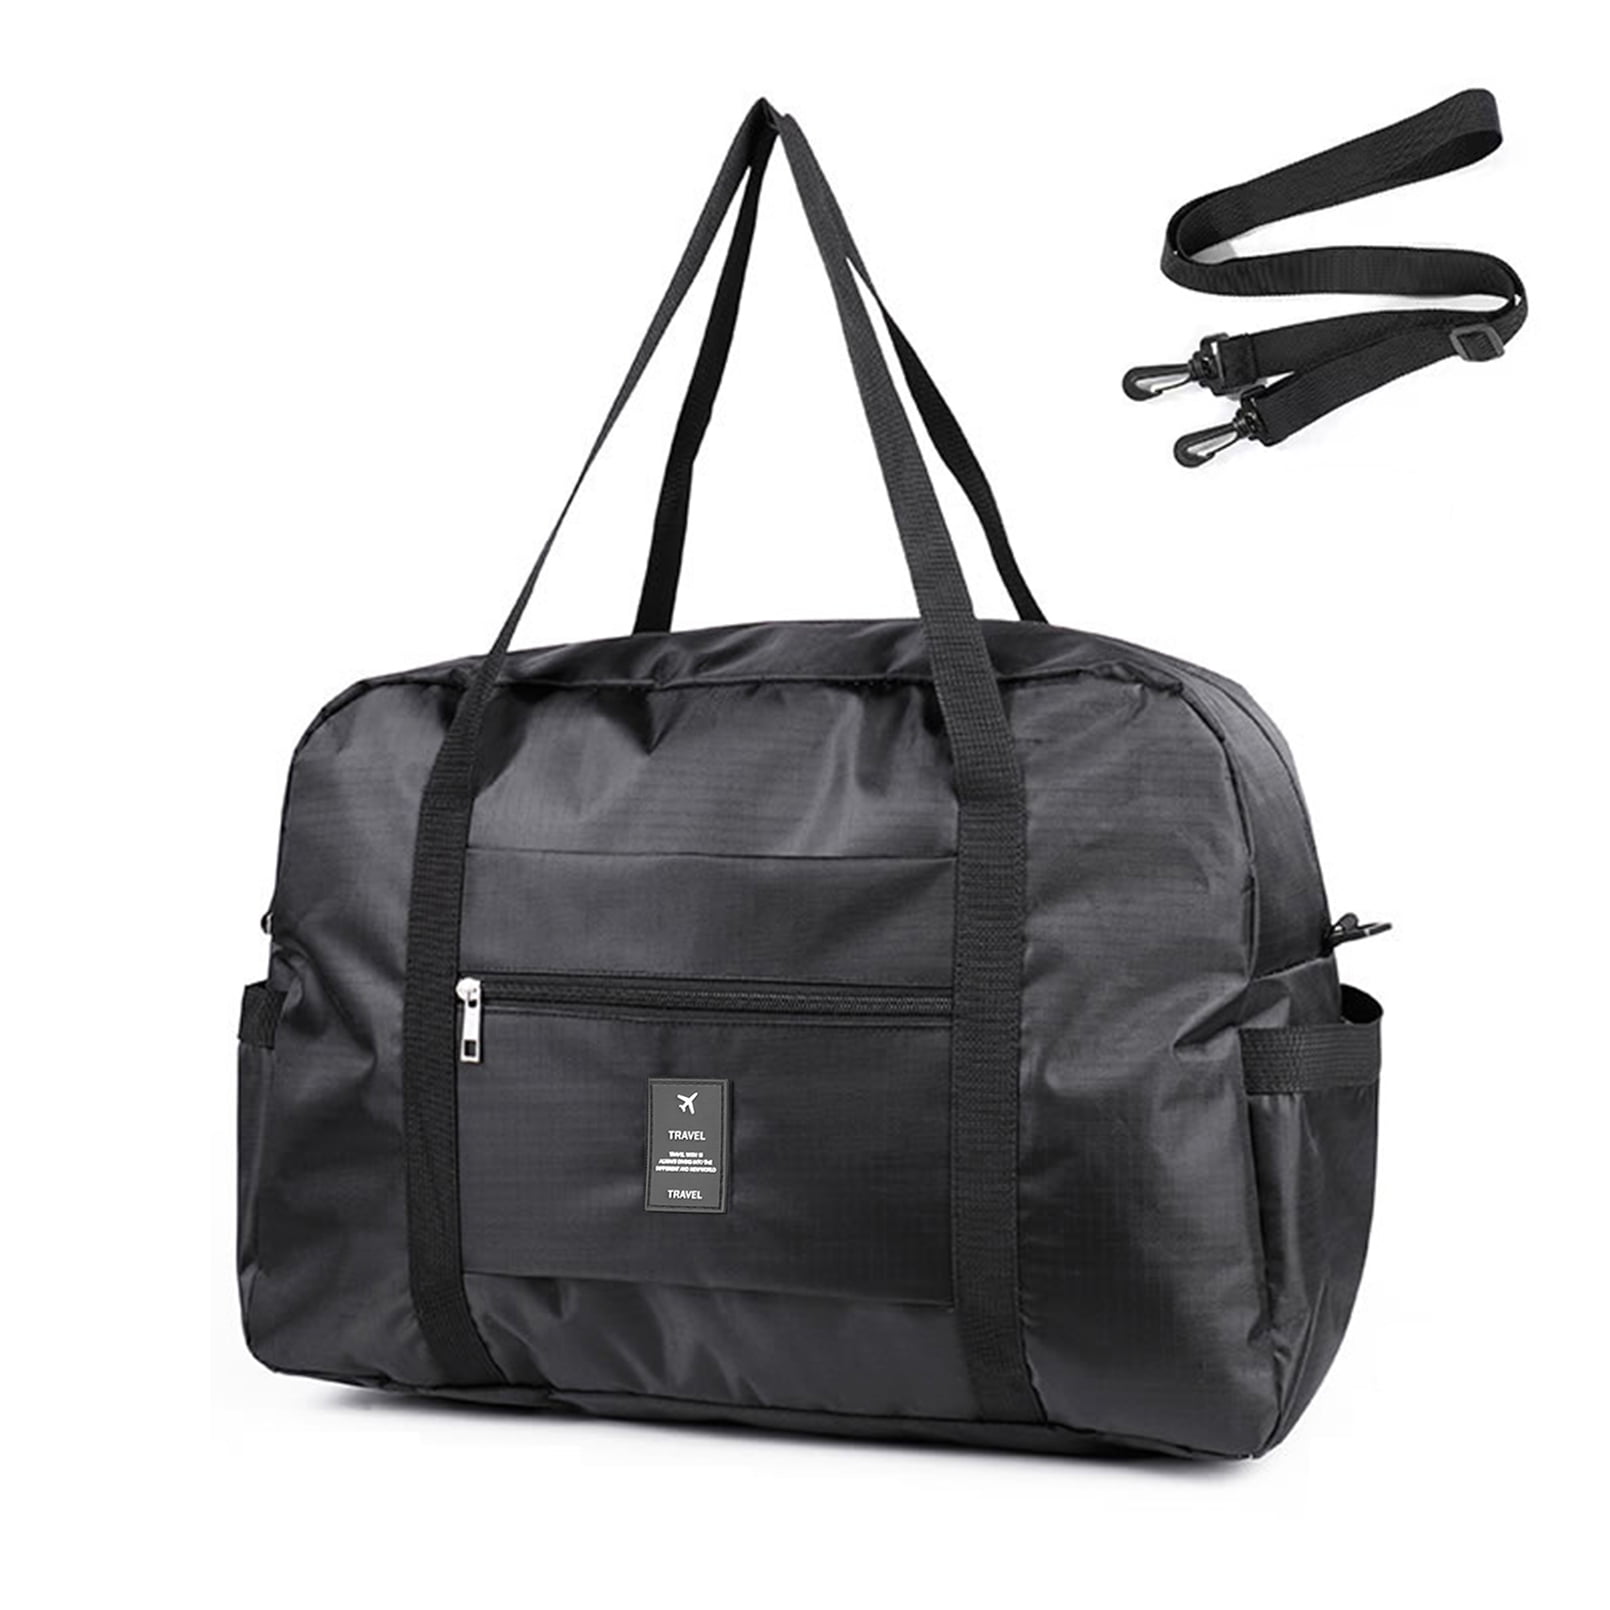 Travel Duffle Bag Foldable with Shoulder Strap, FITDON Travel Holdall ...